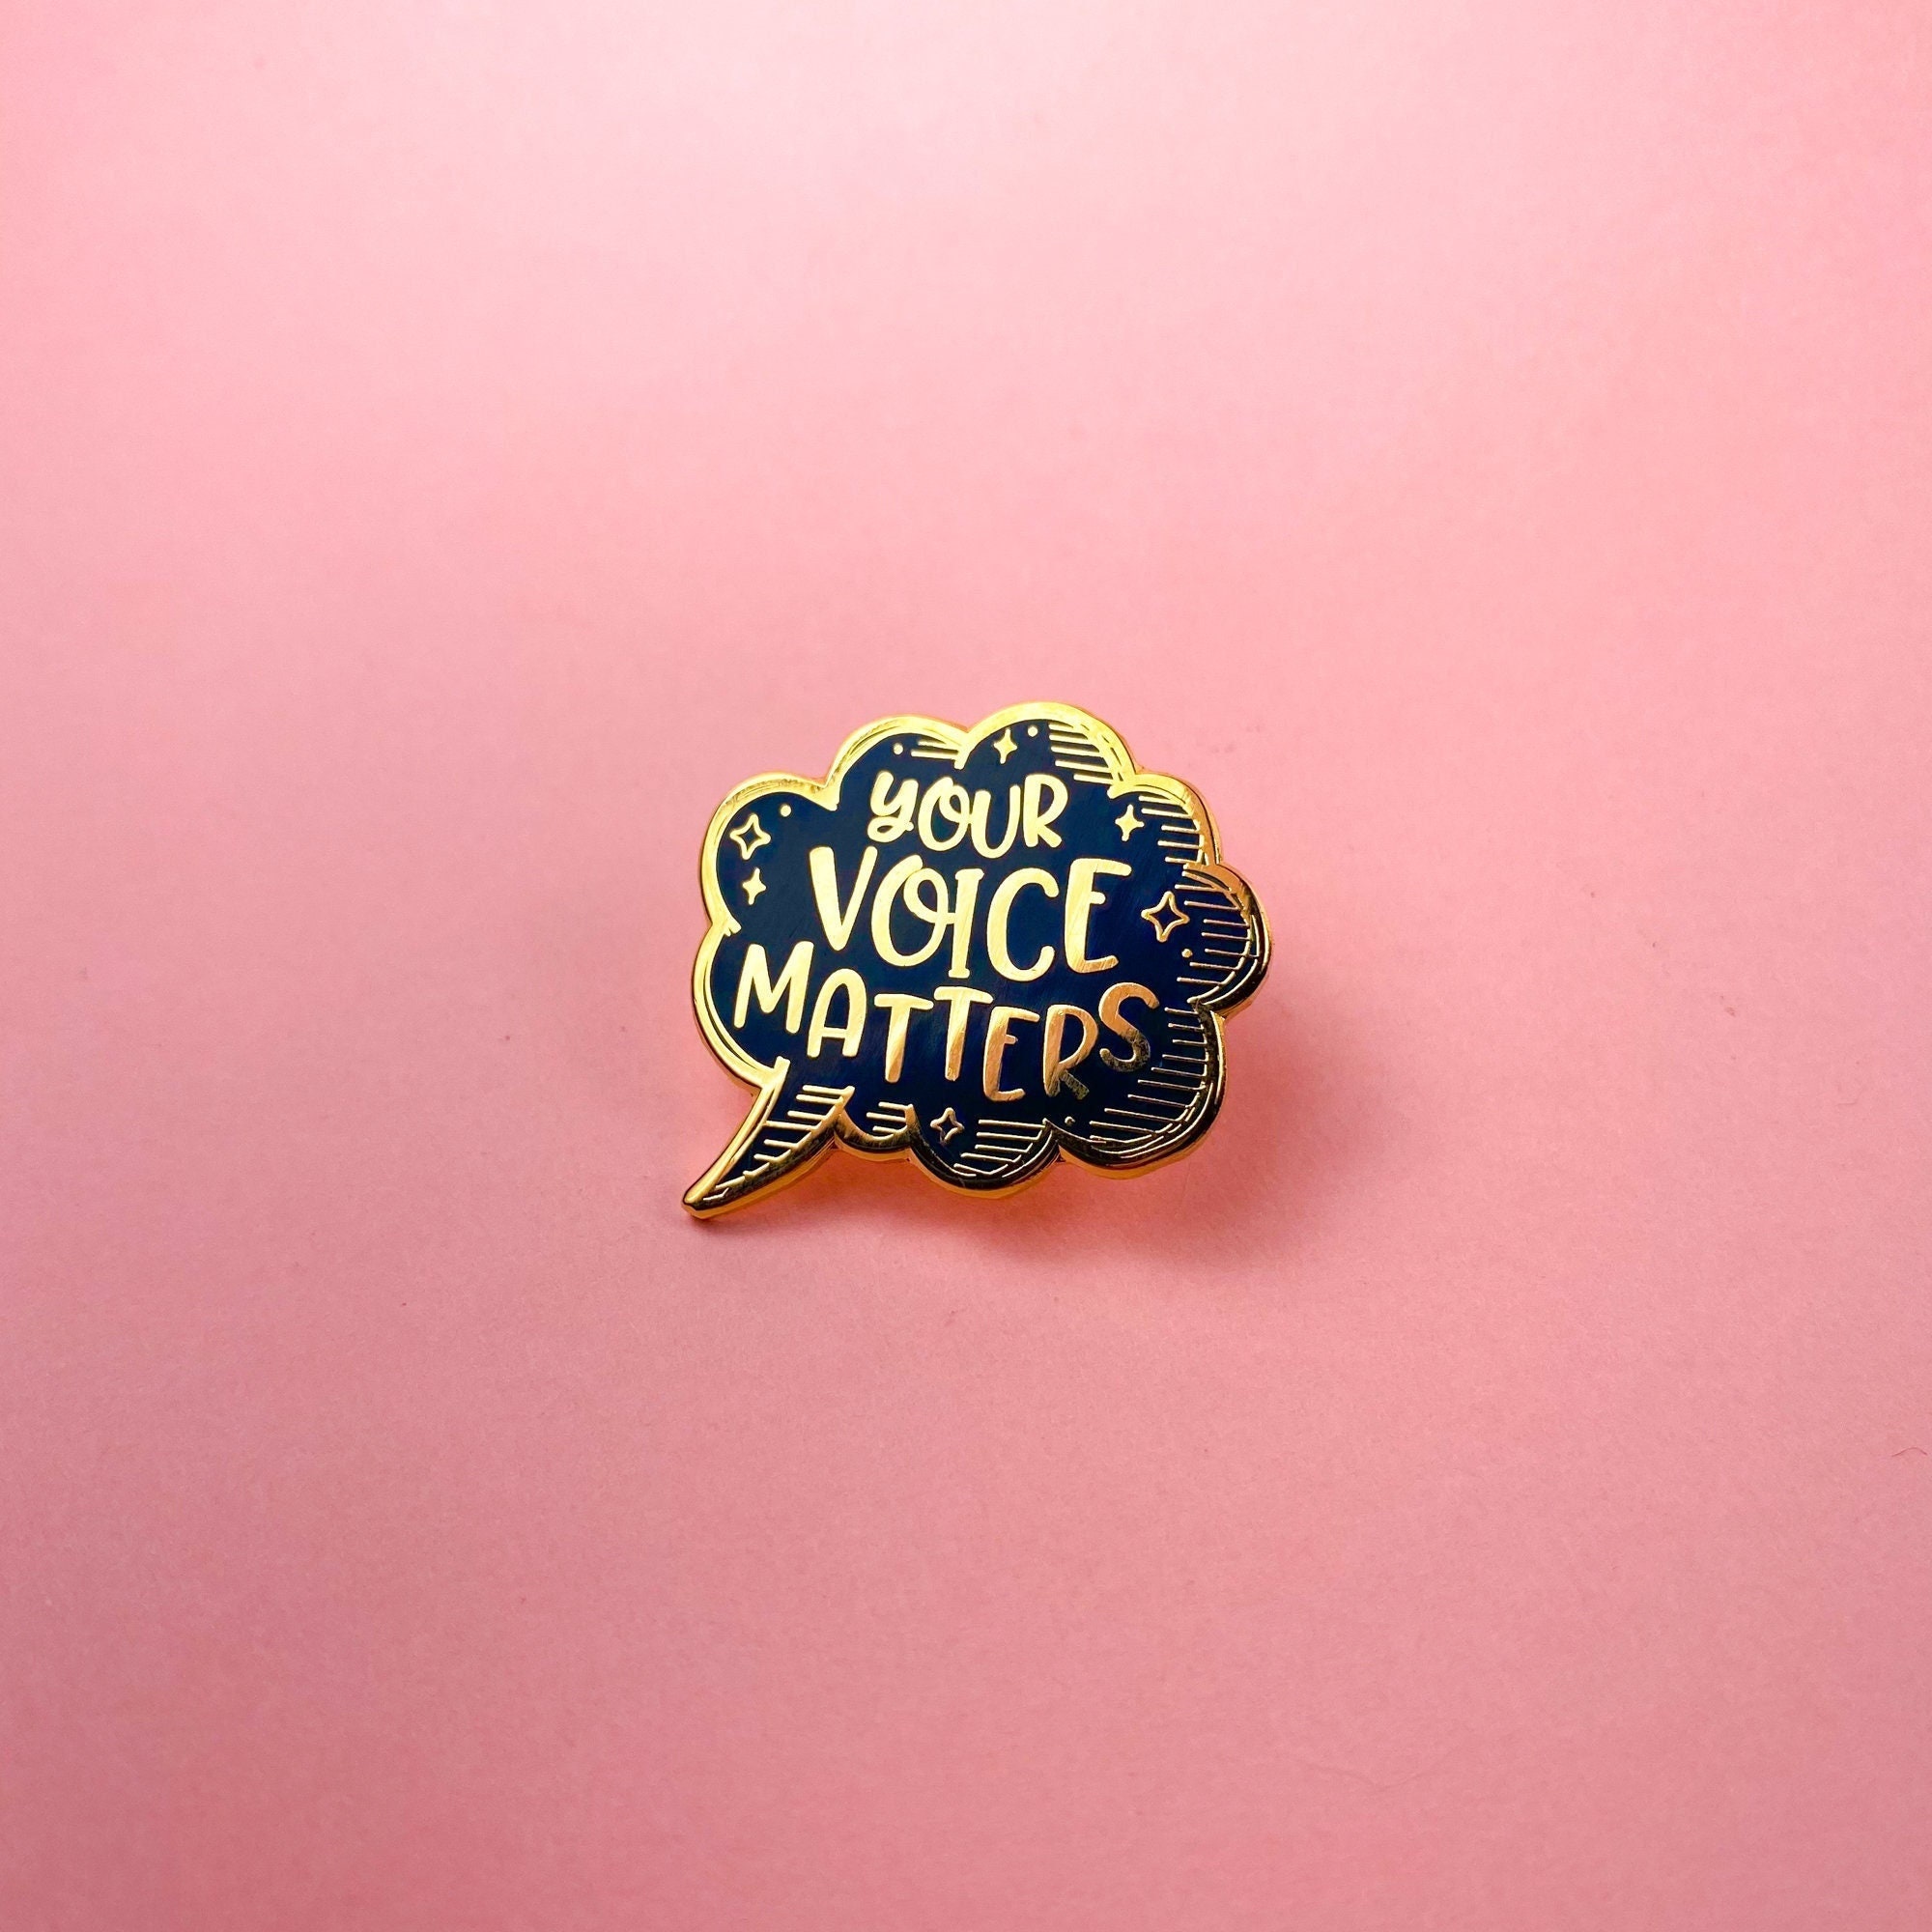 Your Voice Matters Pin | Equality Pin | Unity Inspiration | Lapel Pins with Sayings | All Black Lives Matter | Freedom of Speech